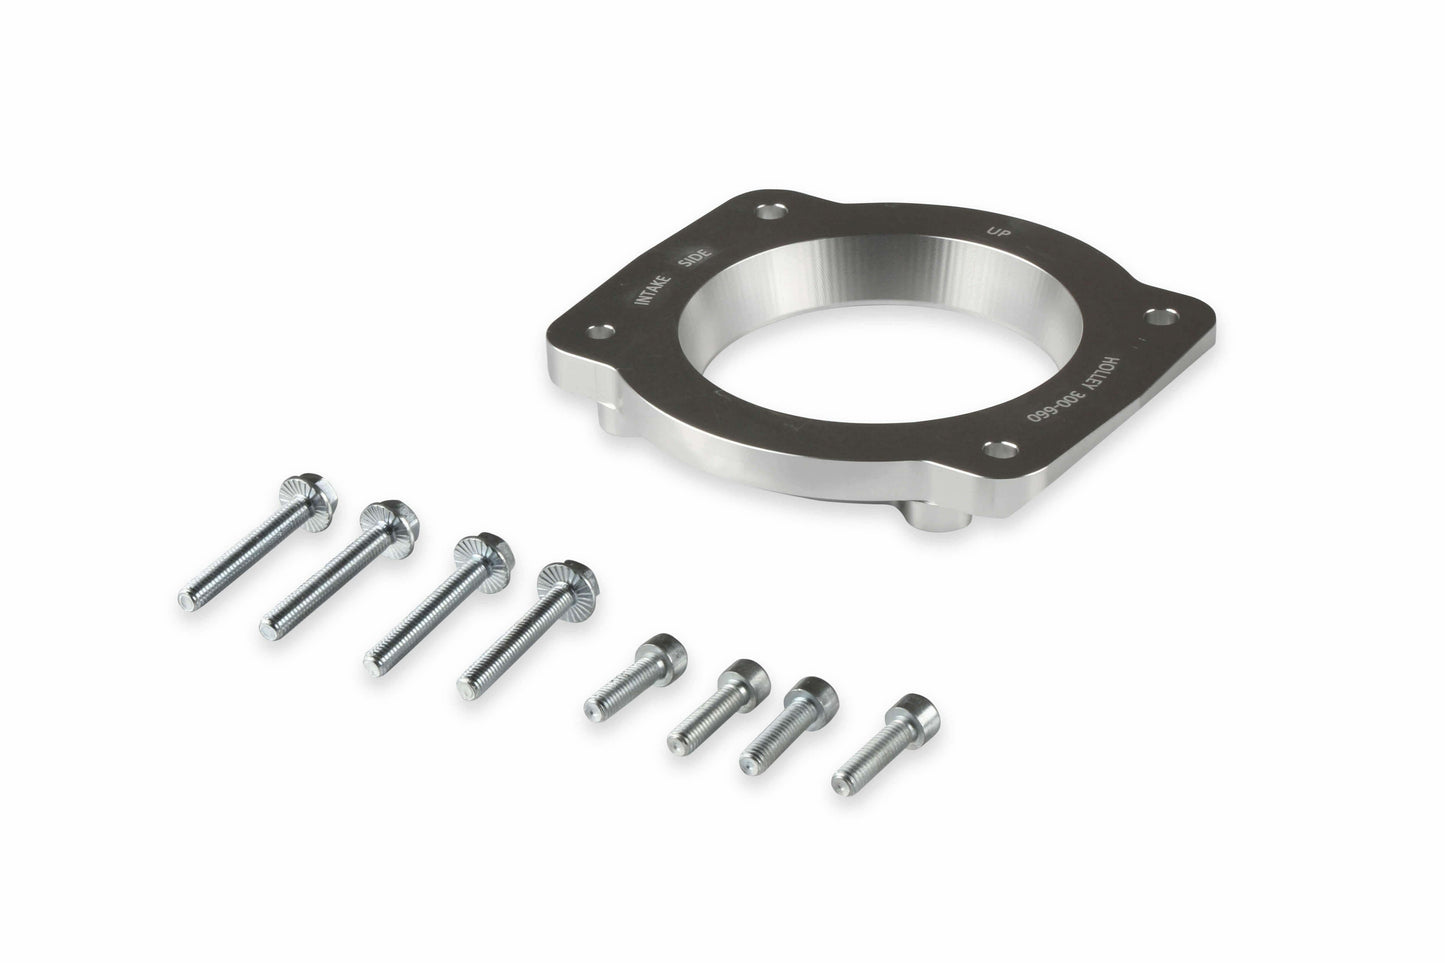 Holley Throttle Body Adapter Plate - 300-660